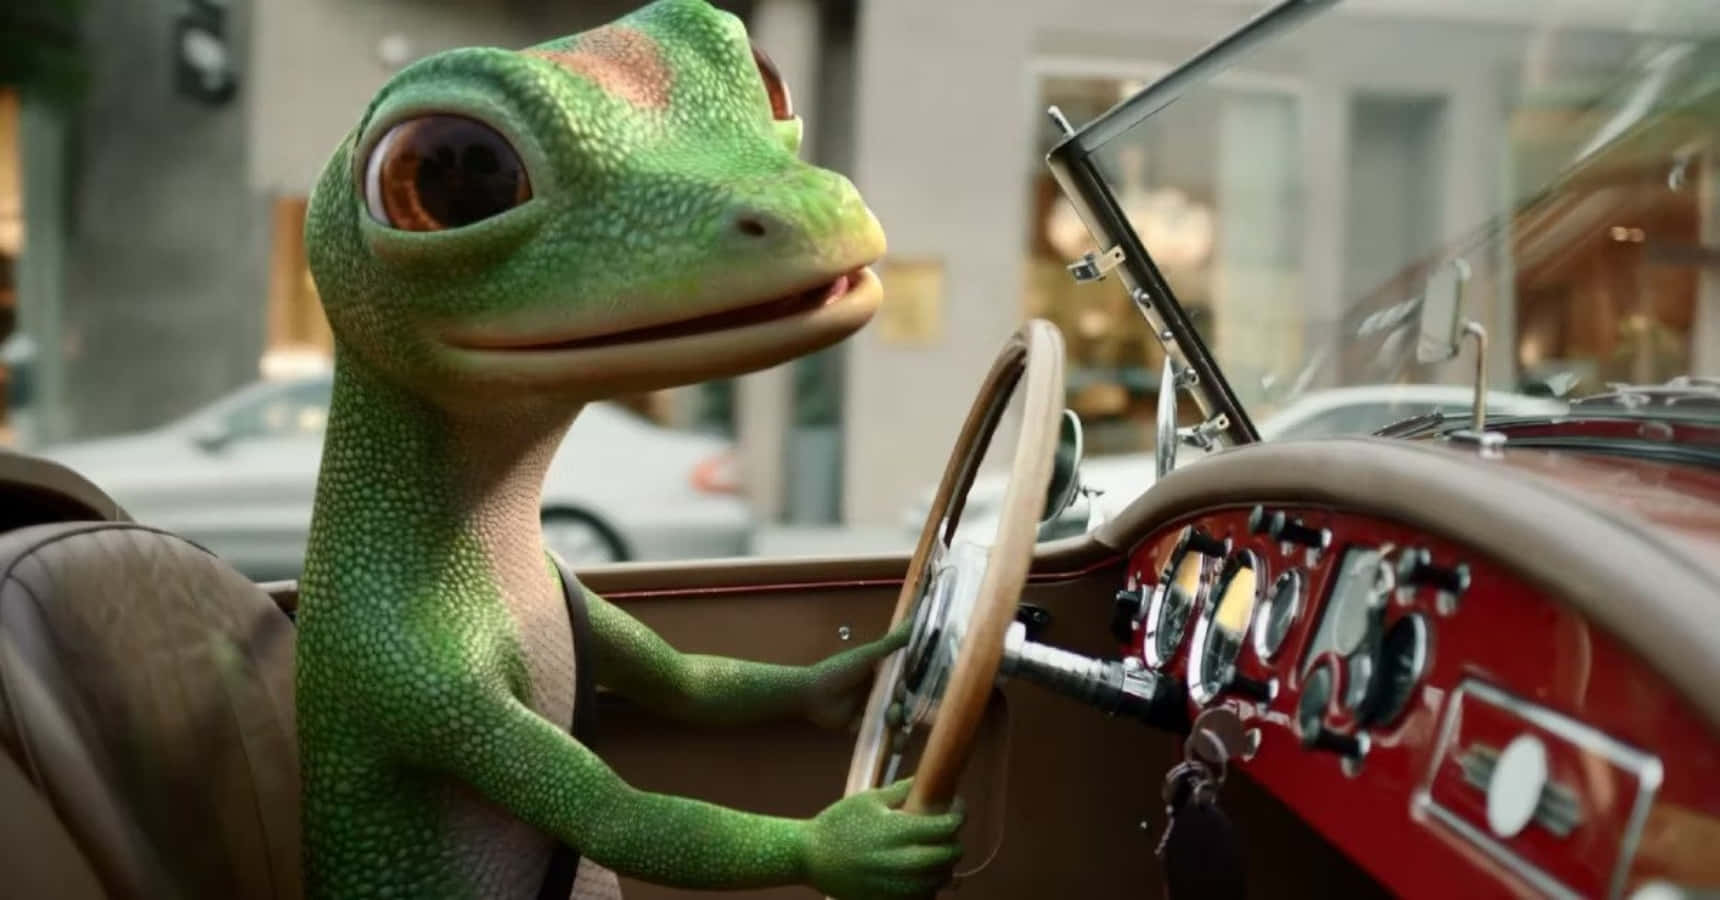 "Protect your car with quality insurance from Geico."